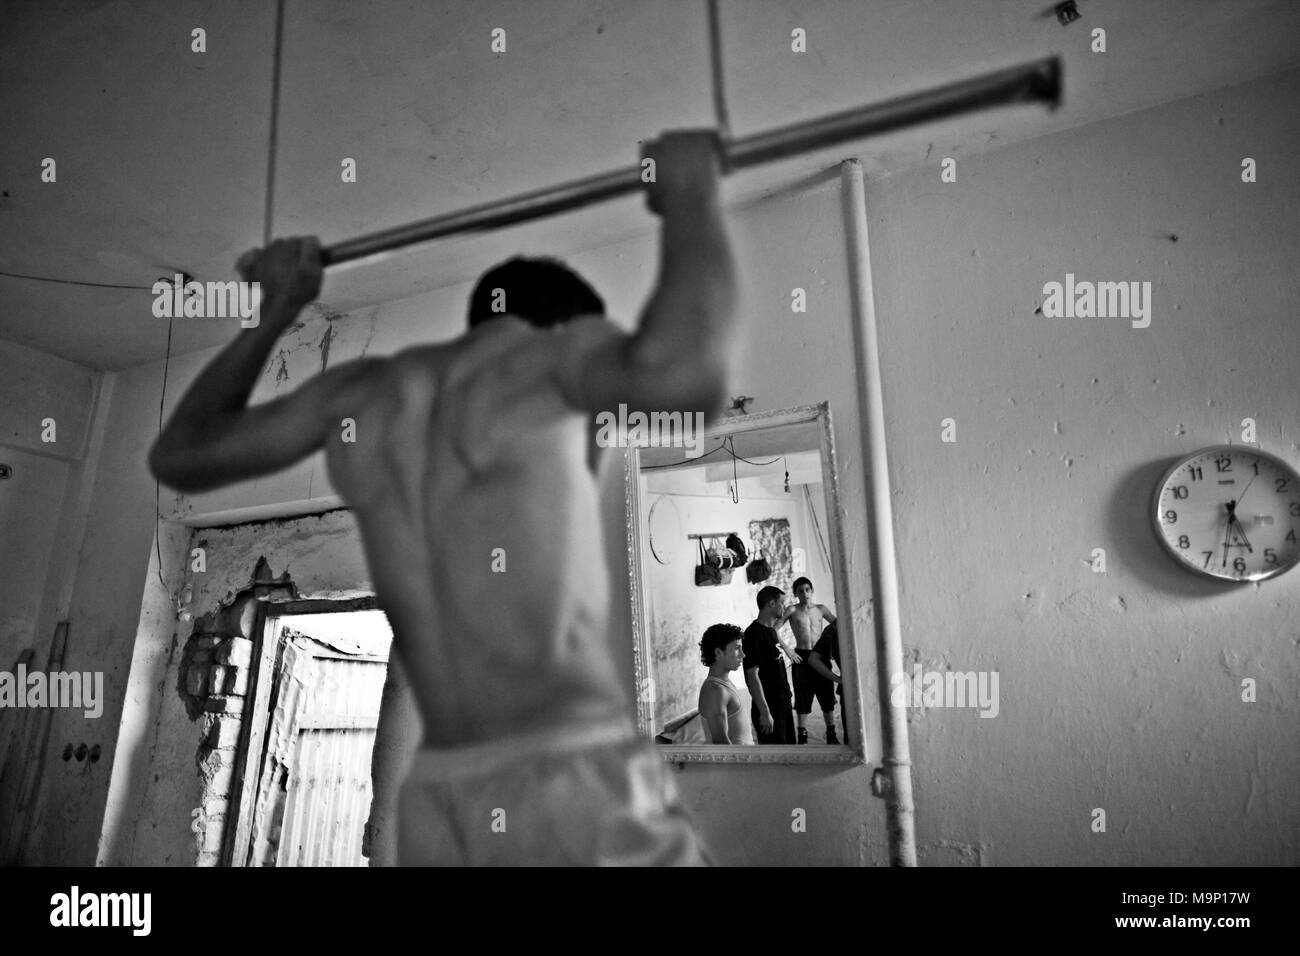 Afghan wrestlers train at a gym in Kabul, Afghanistan, Saturday, September 13, 2009. Many forms of exercise were banned under the Taliban rule. Stock Photo